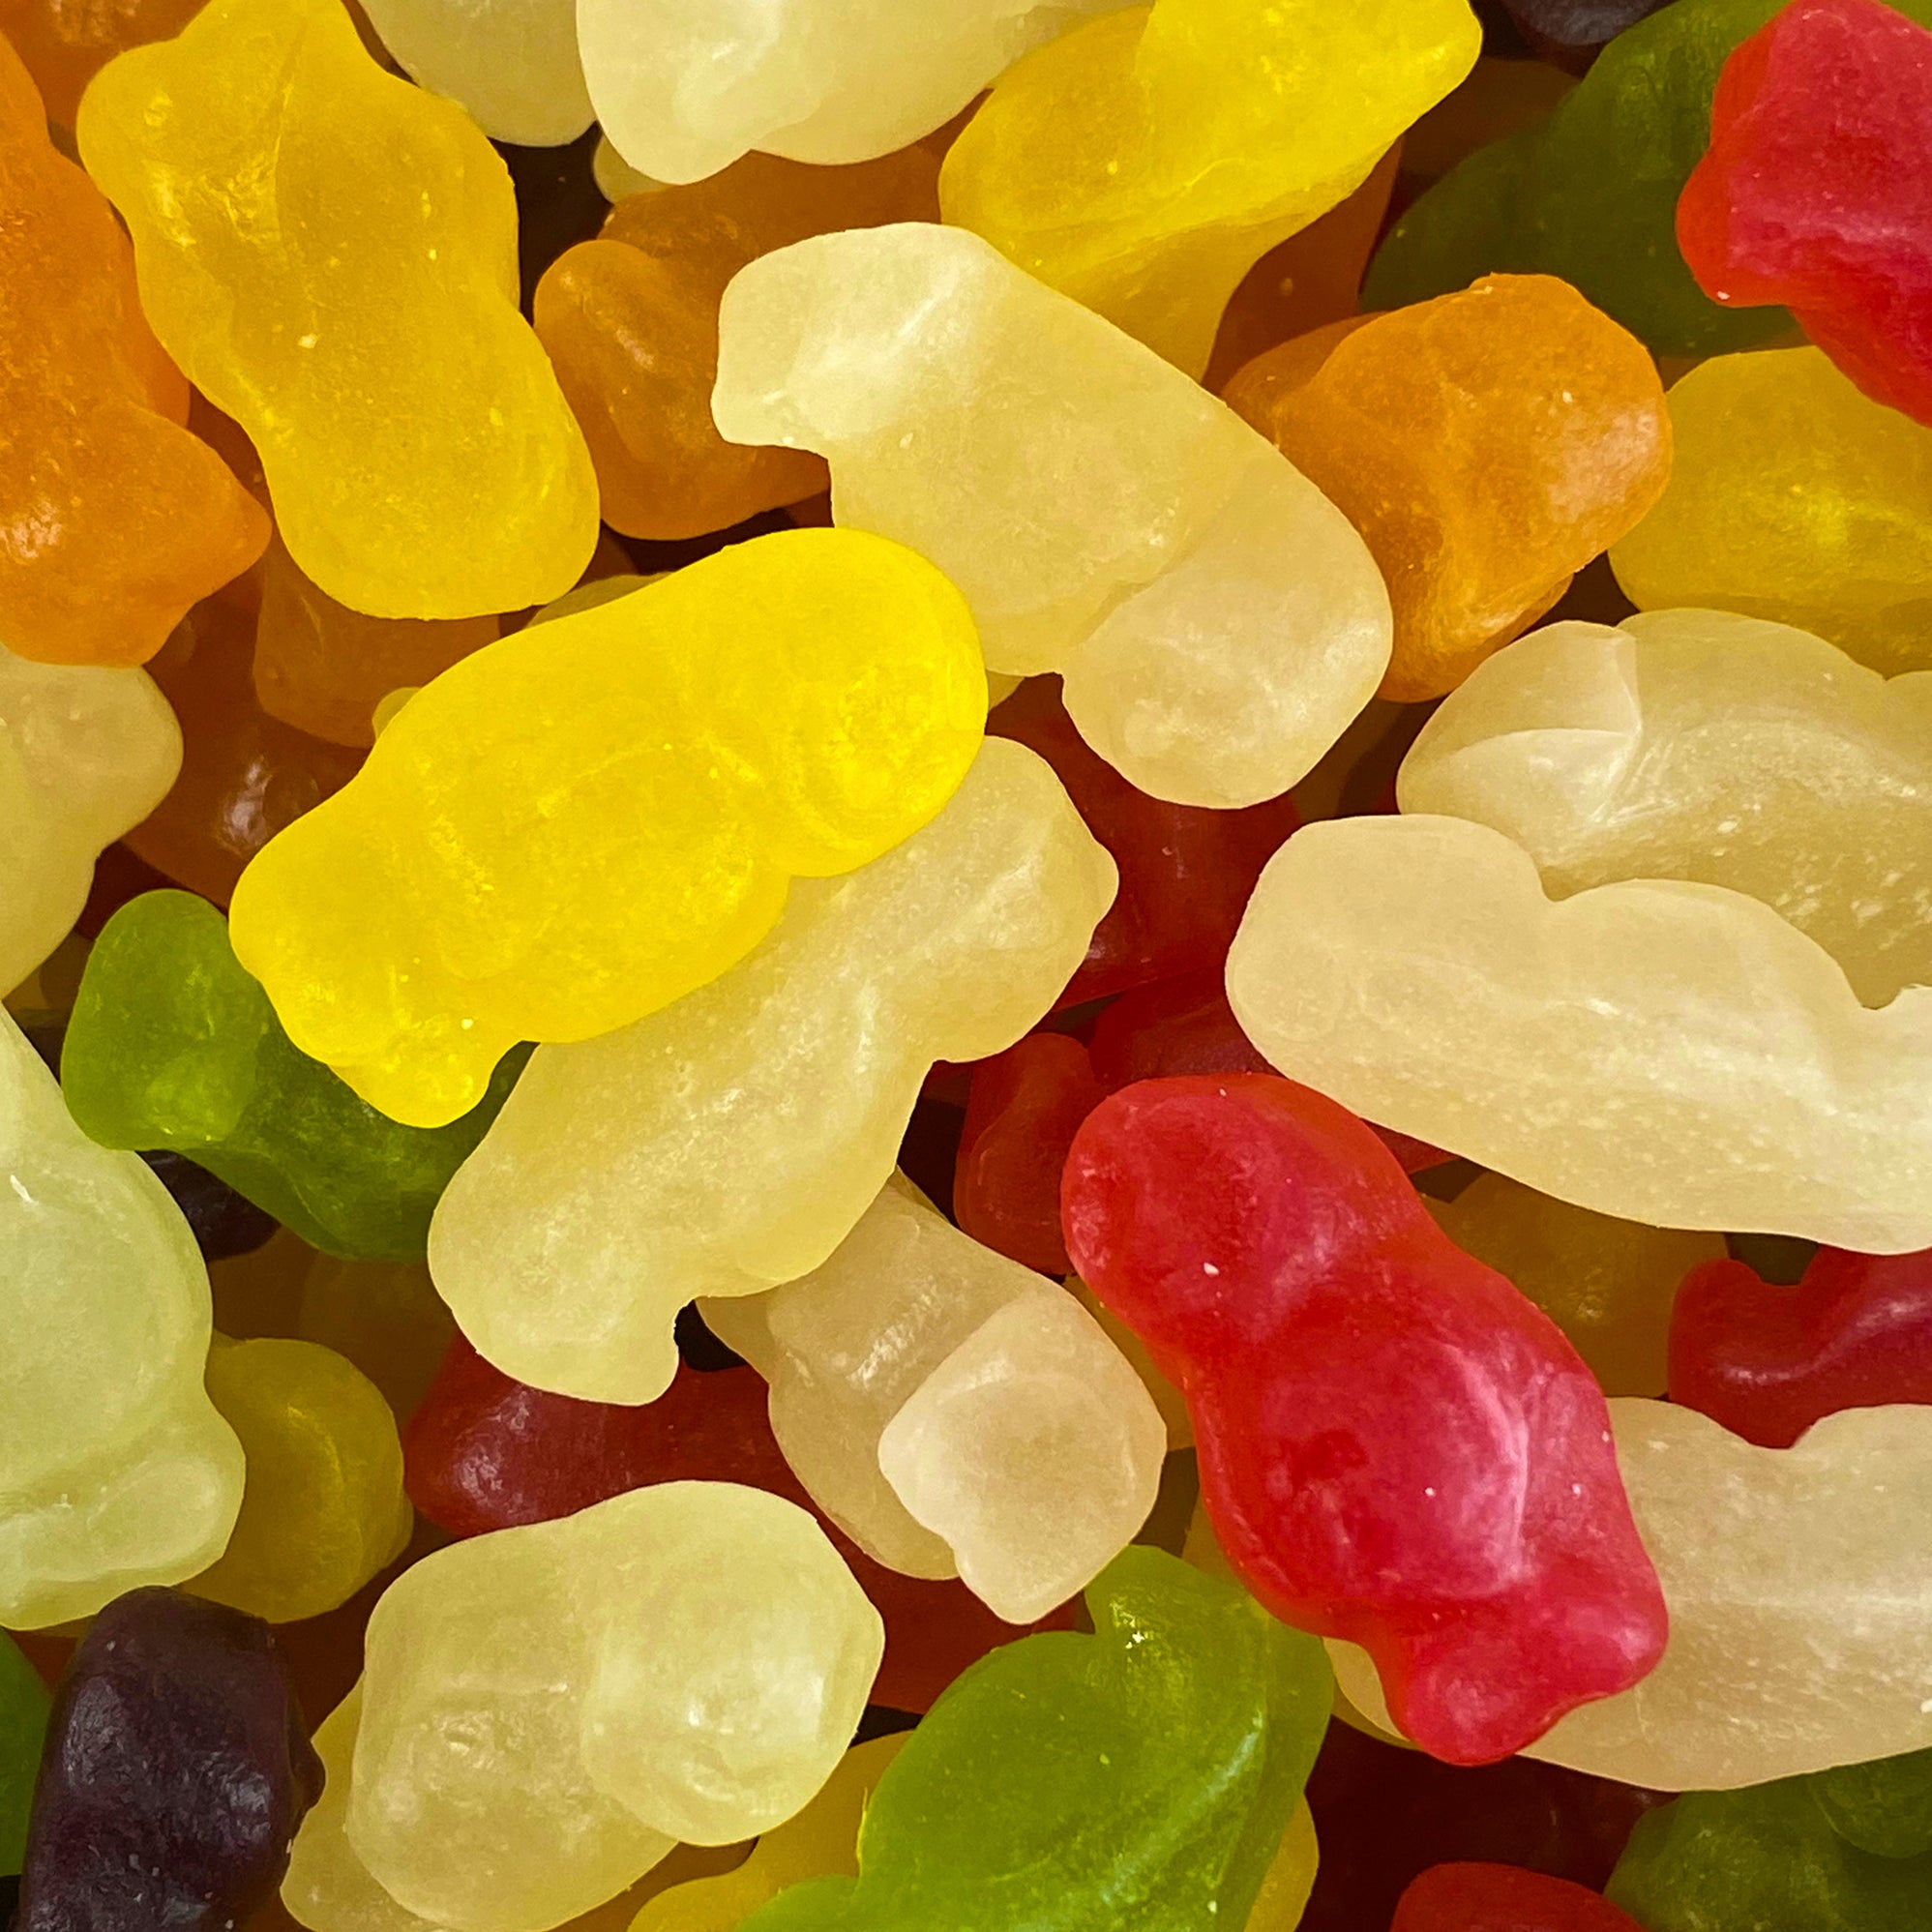 Haribo Sweets - Get Haribo Sweets Straight to Your Door - The Sweet Store